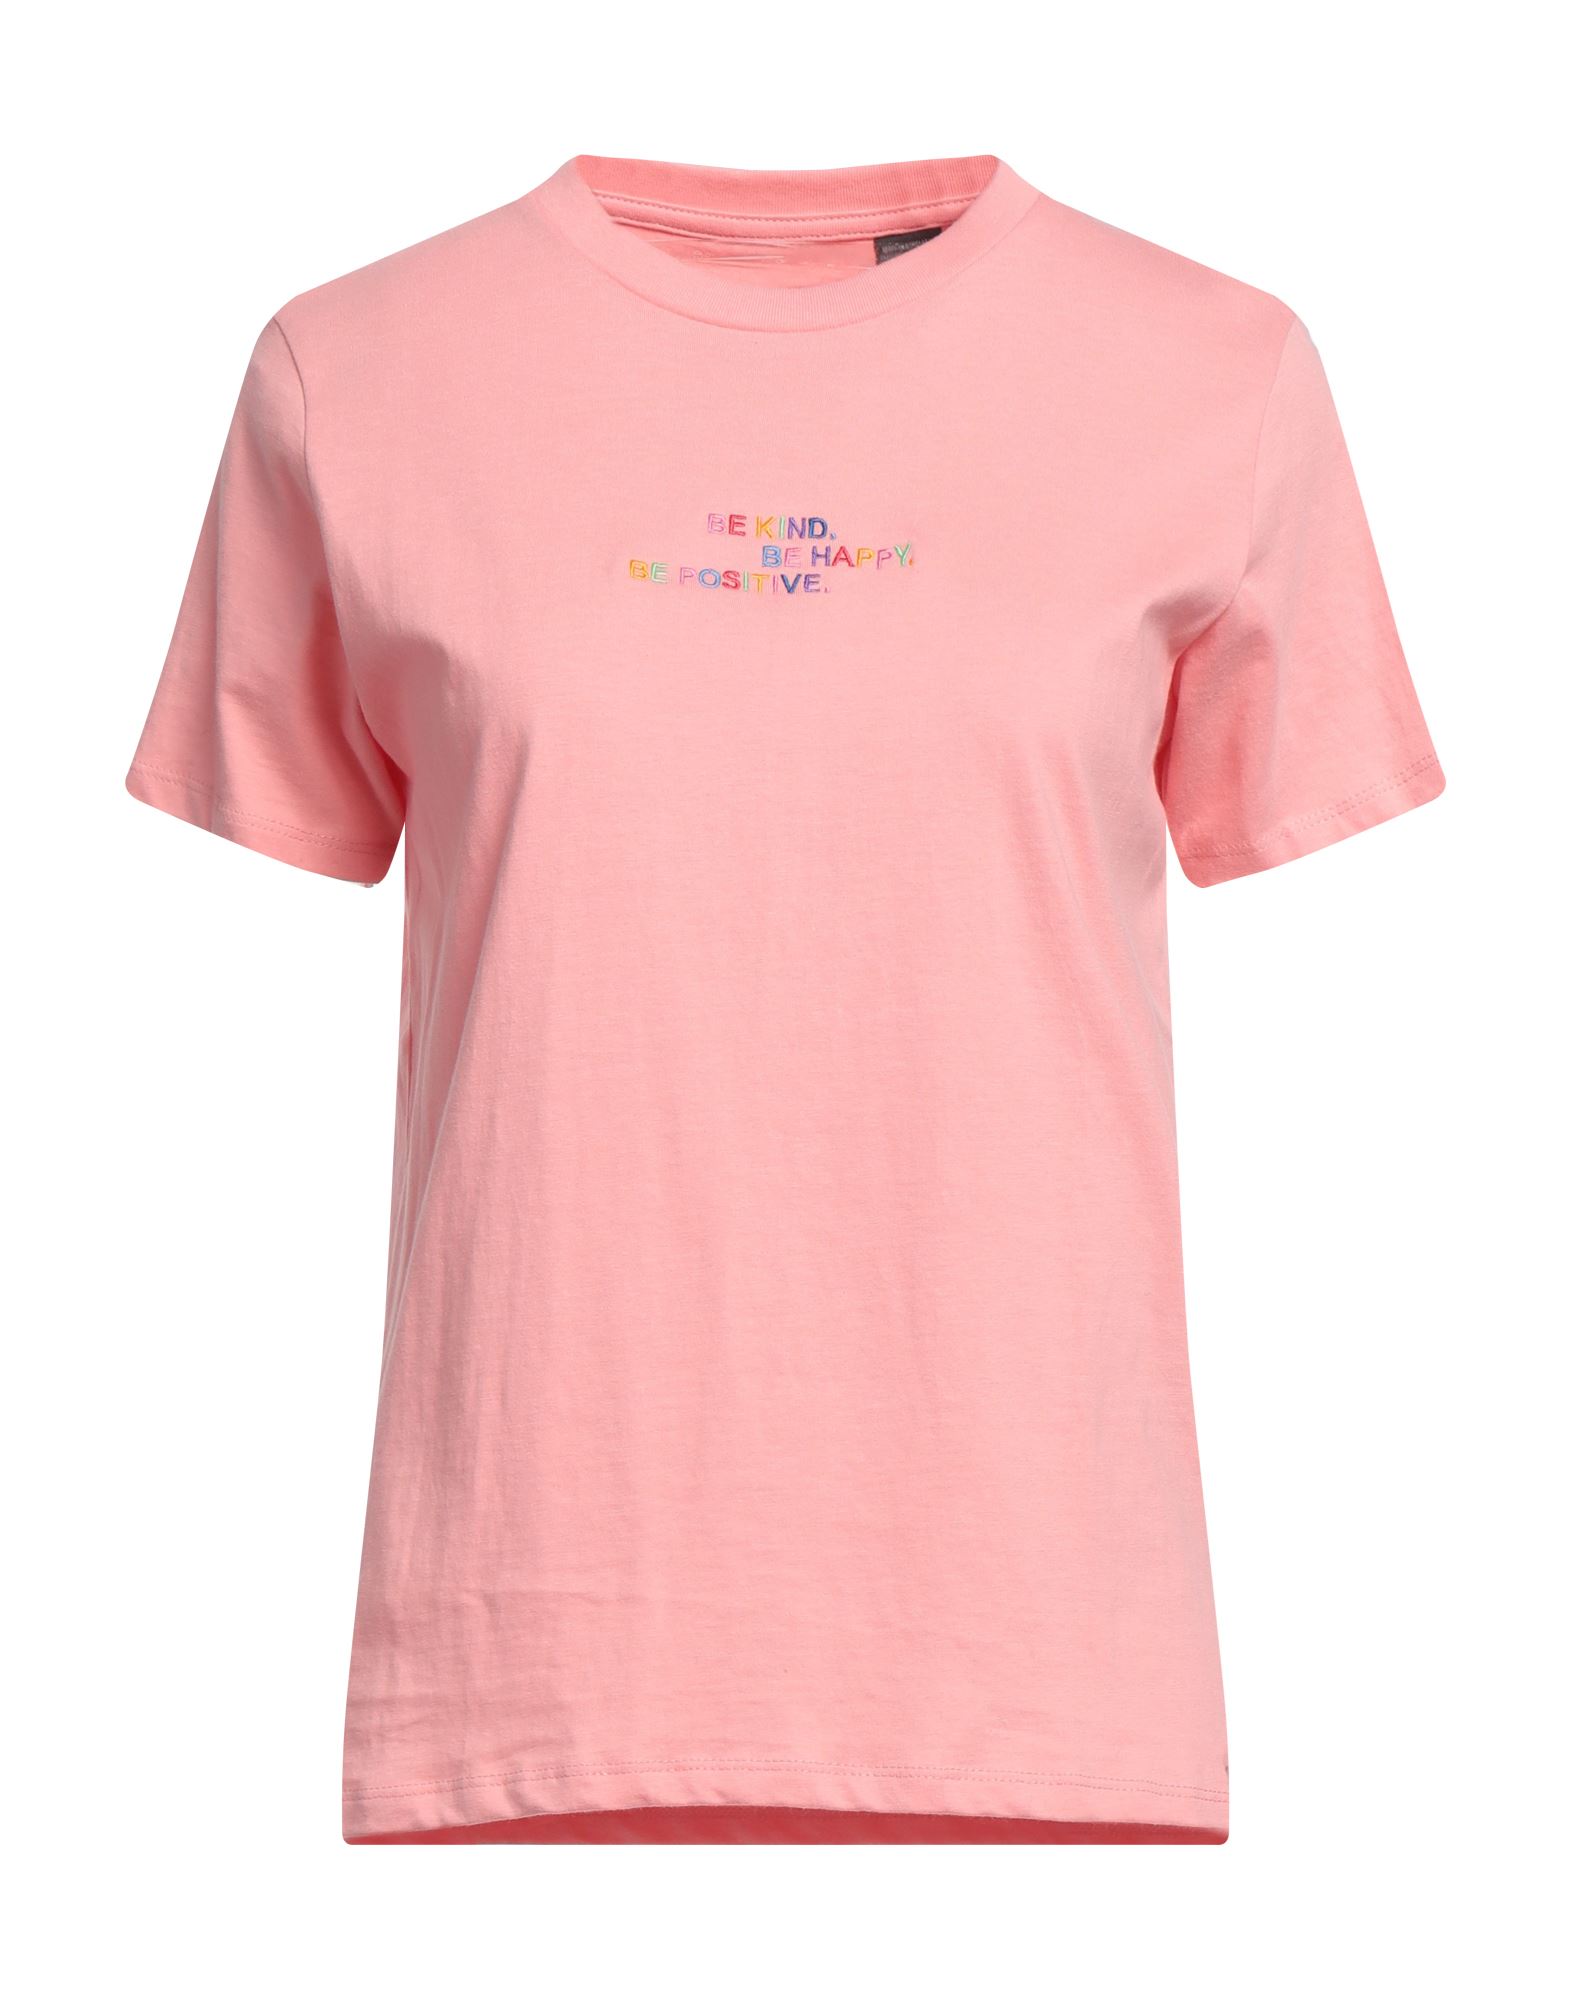 FRENCH CONNECTION T-shirts Damen Rosa von FRENCH CONNECTION